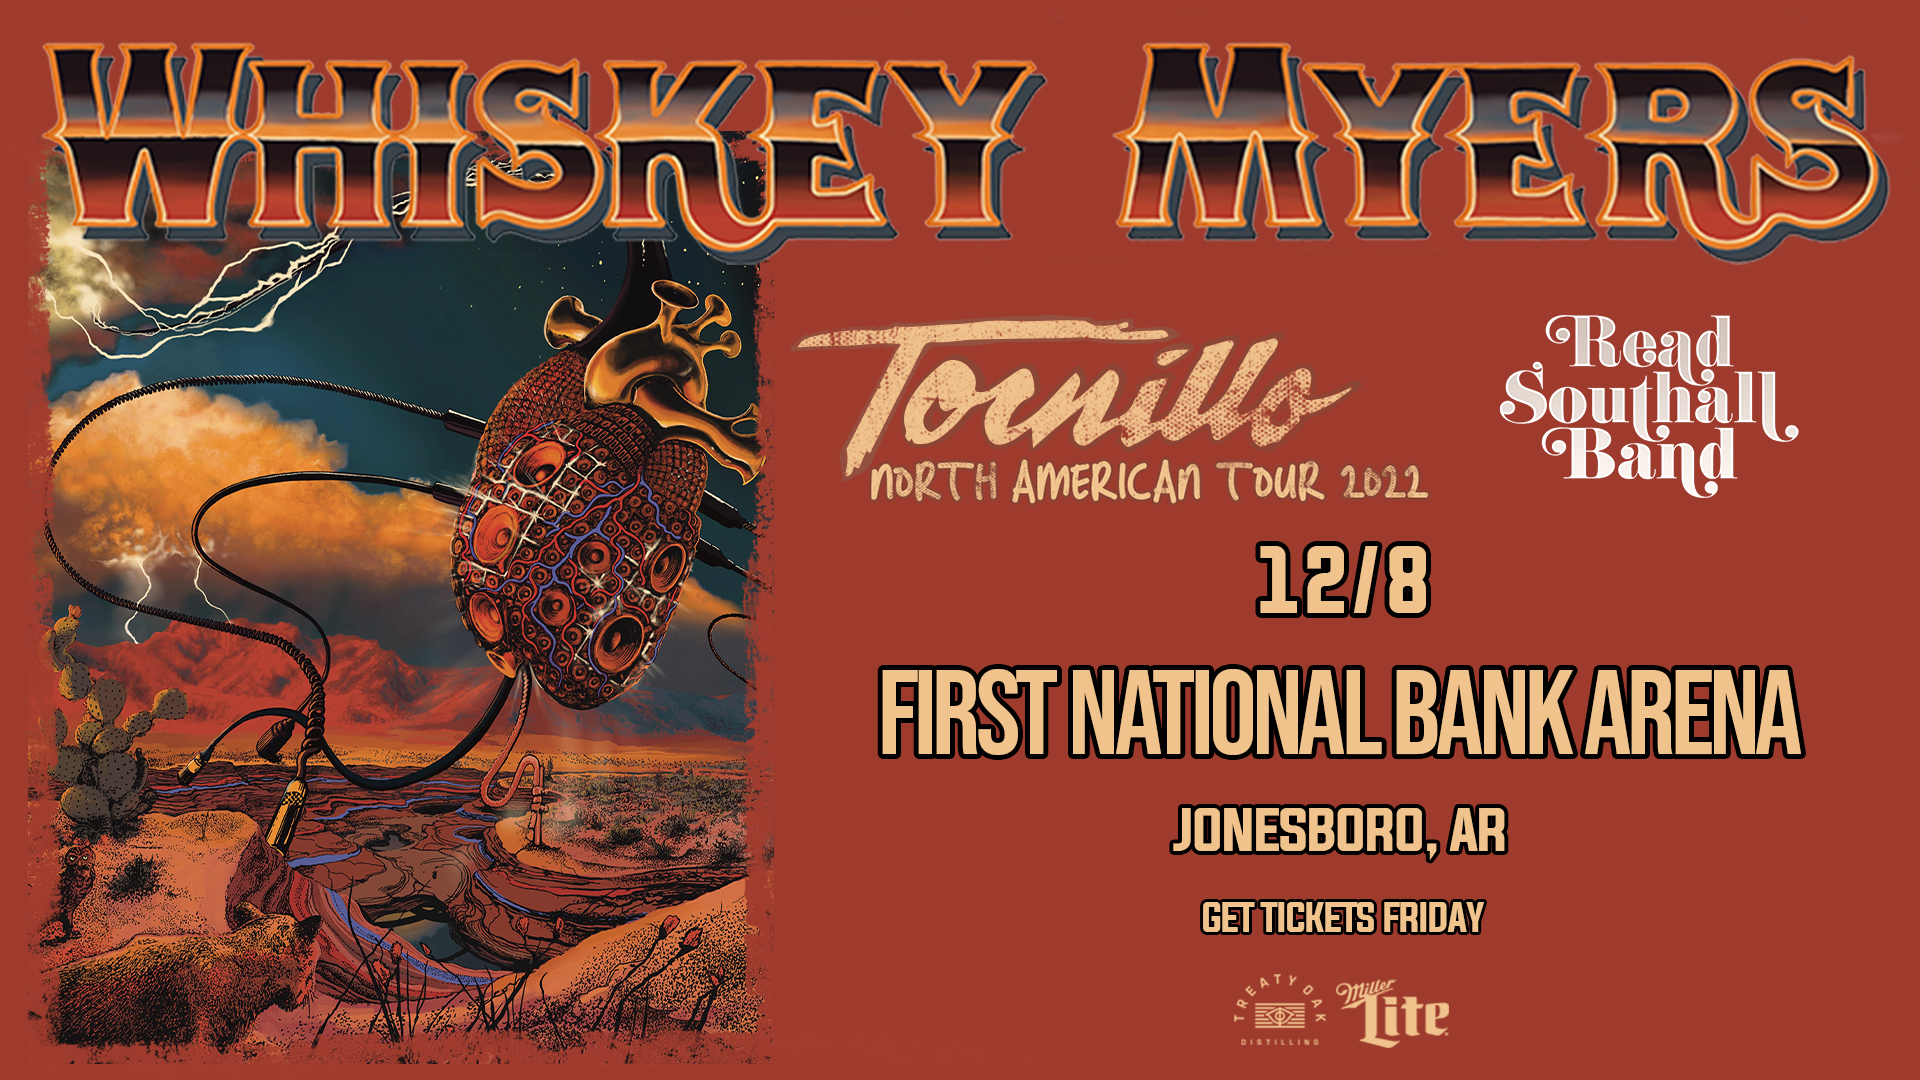 WHISKEY MYERS with special guest READ SOUTHALL BAND